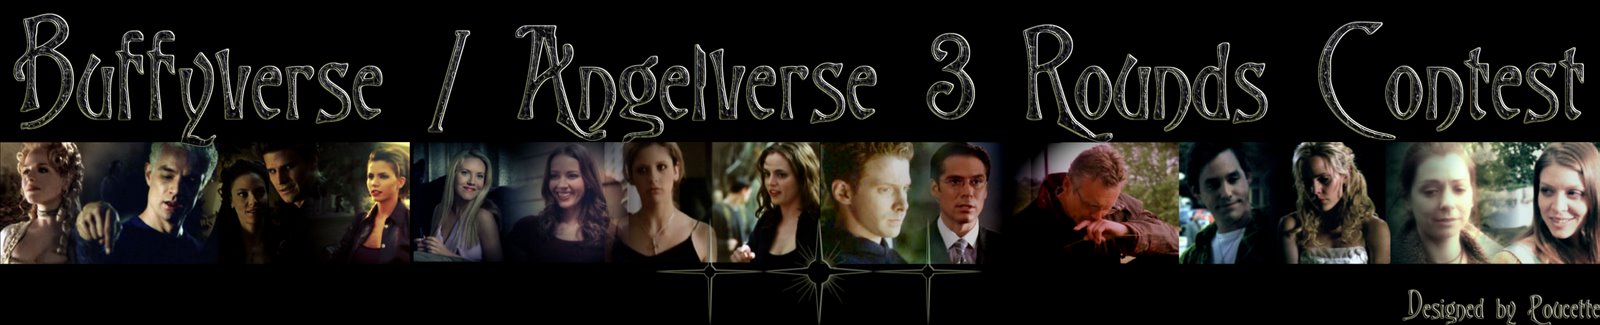 BUFFYVERSE / ANGELVERSE 3 ROUNDS CONTEST ENTRIES